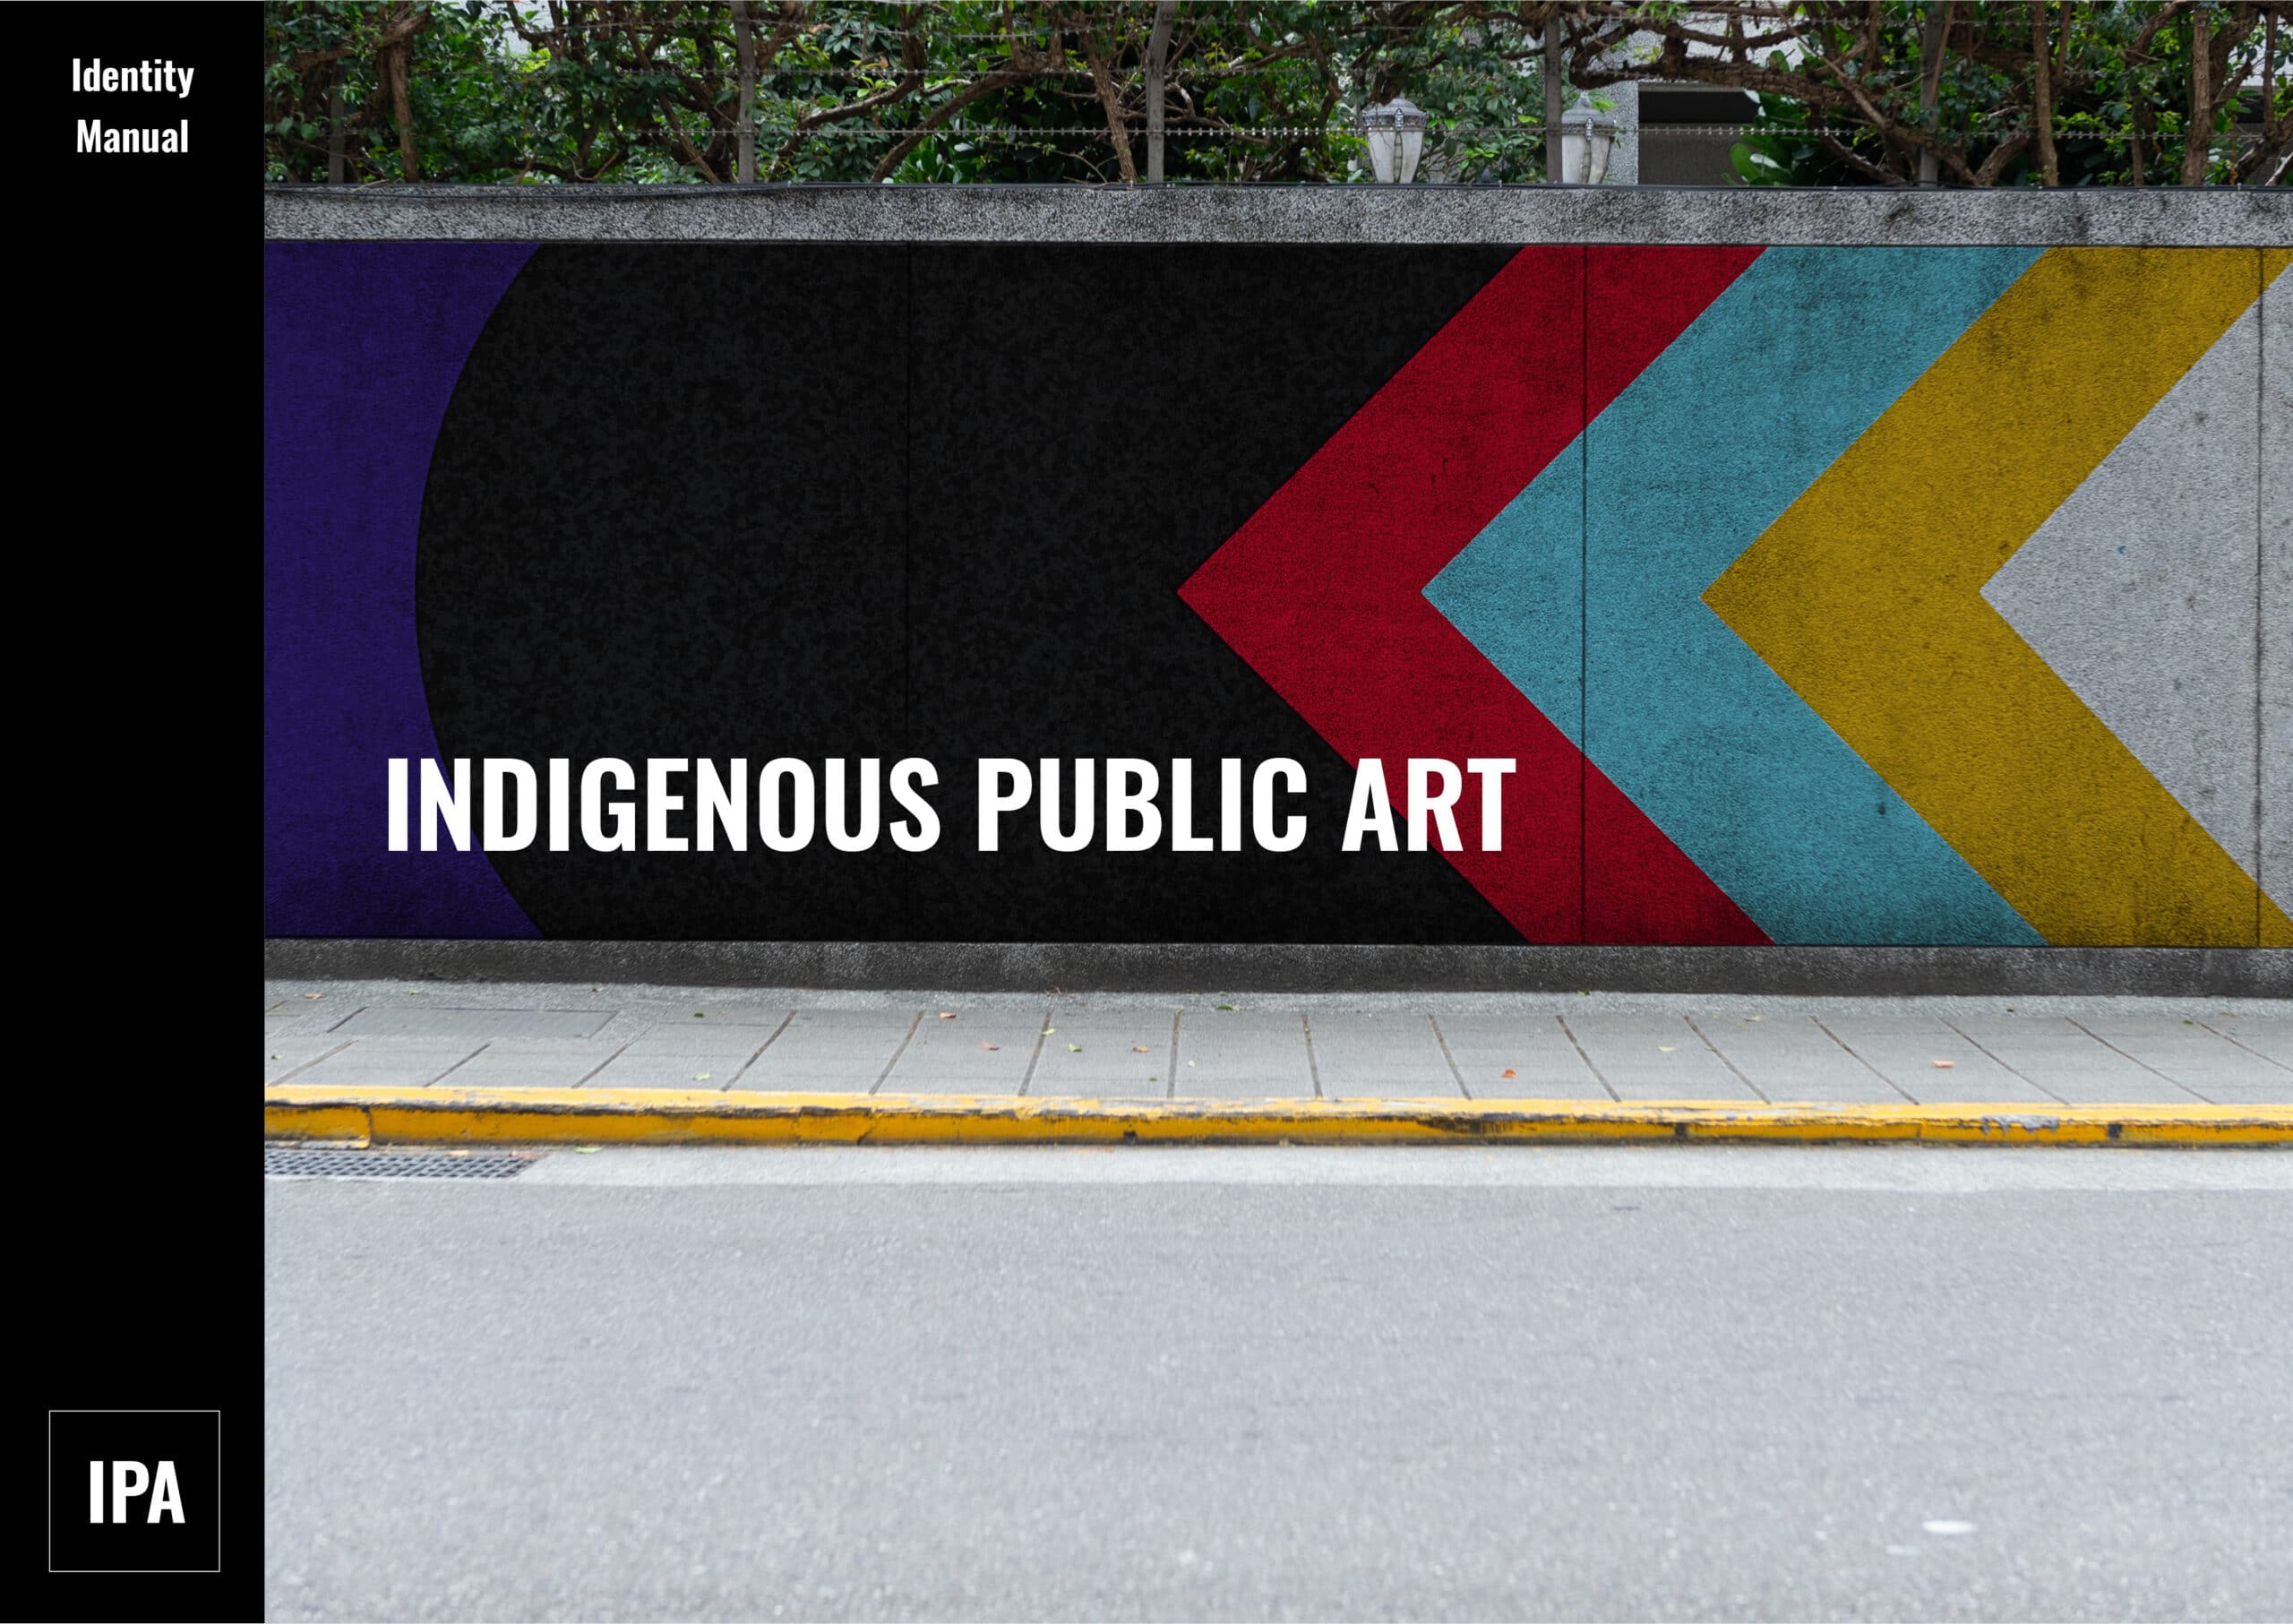 The cover of the Brand Guide for the Indigenous Public Art Repository.